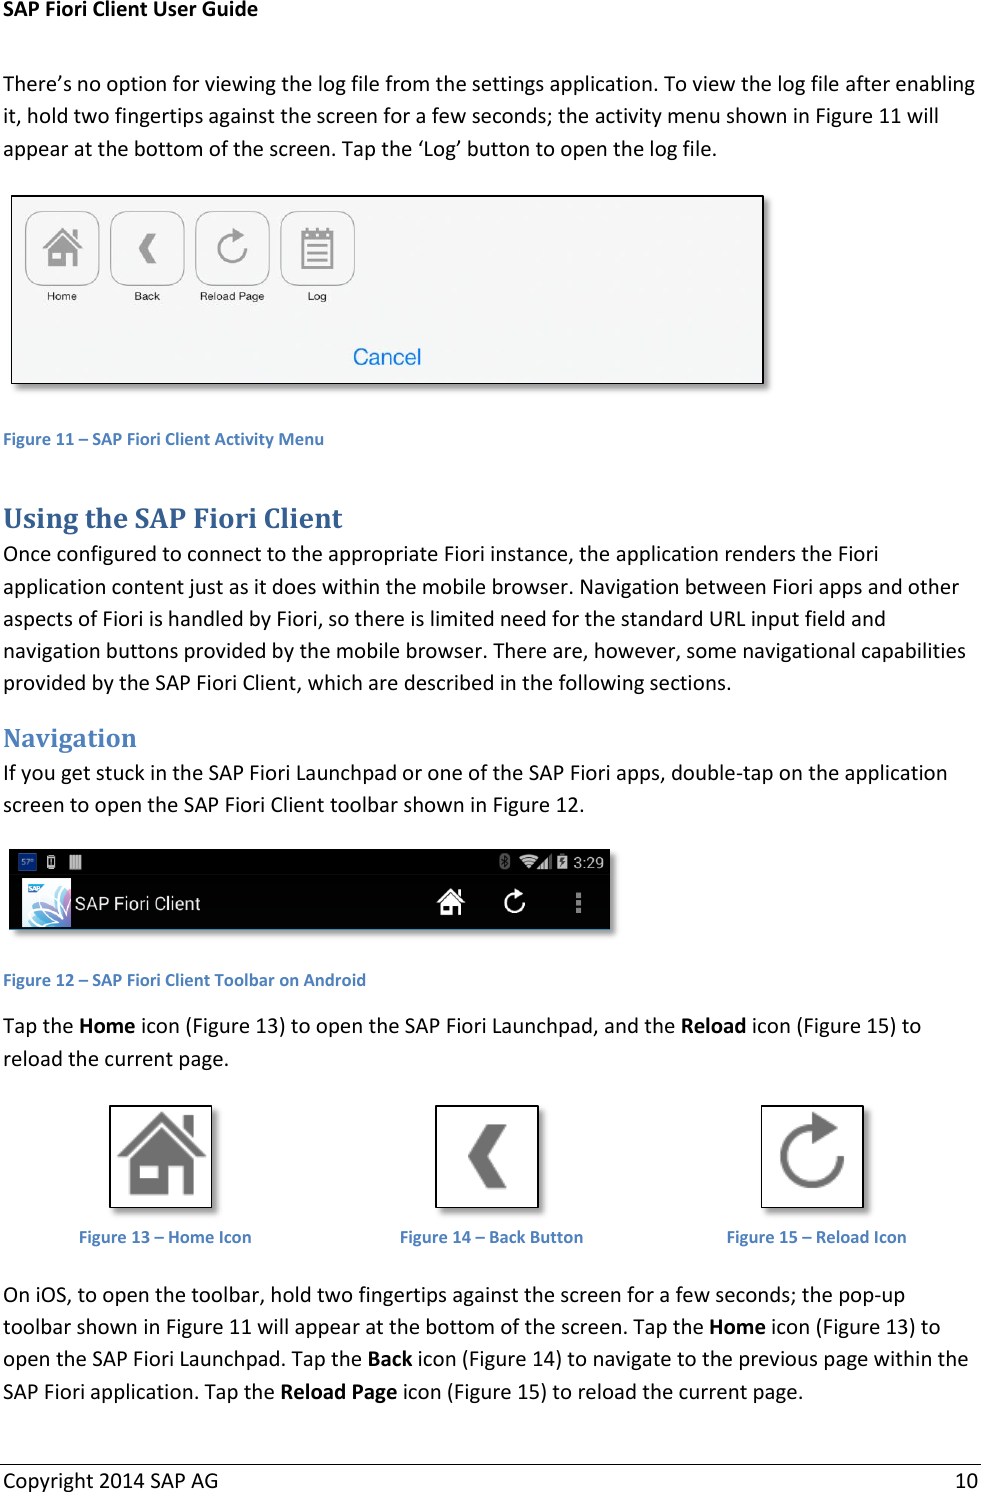 Page 11 of 12 - SAP Fiori Client User Guide